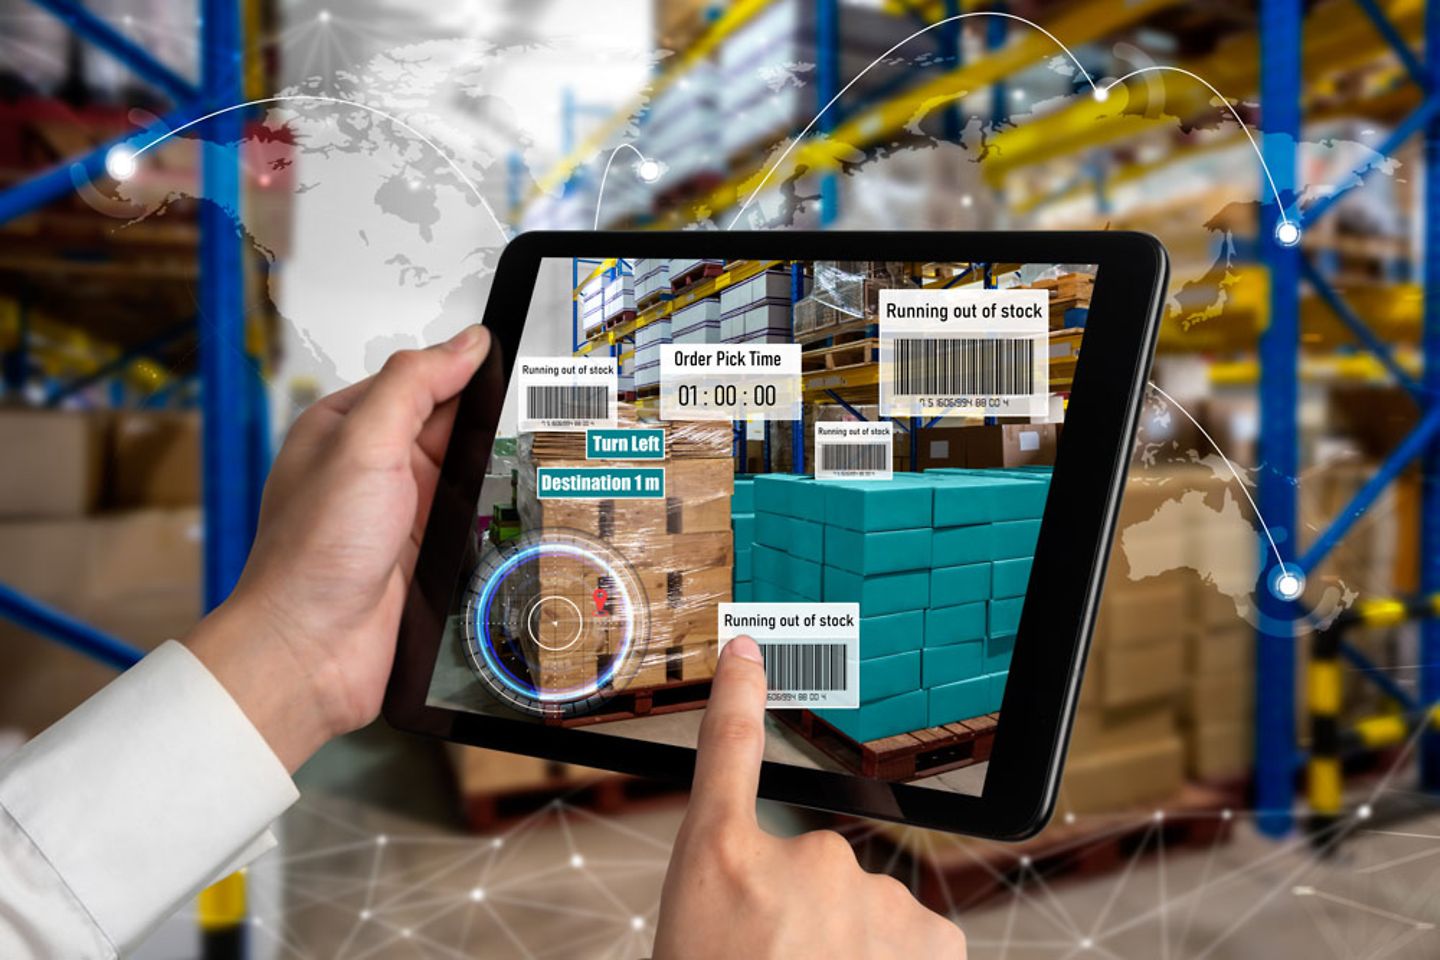 : Smart warehouse management system using augmented reality technology